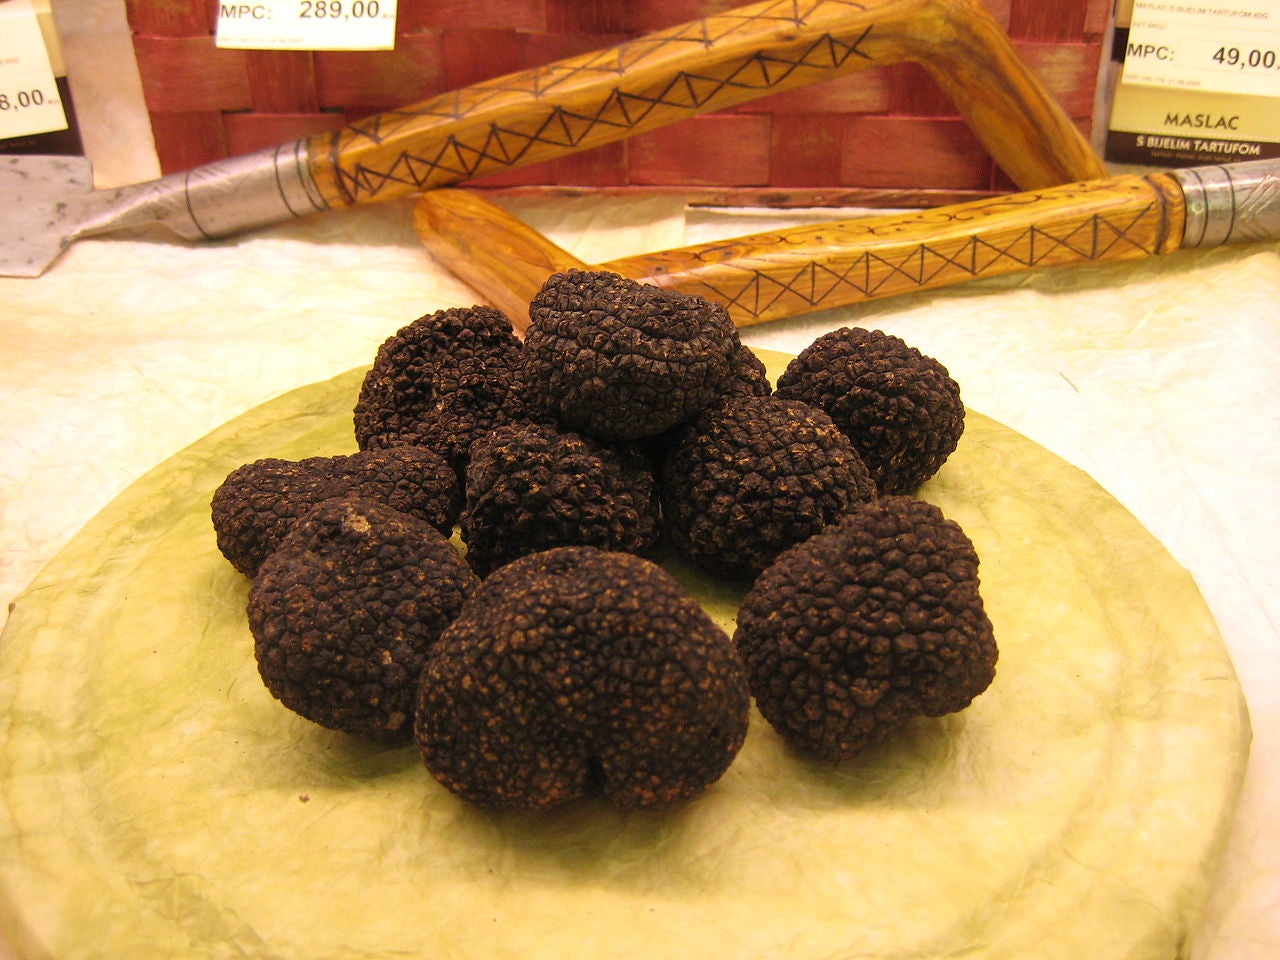 Black truffles have been found to have molecules similar to THC in cannabis